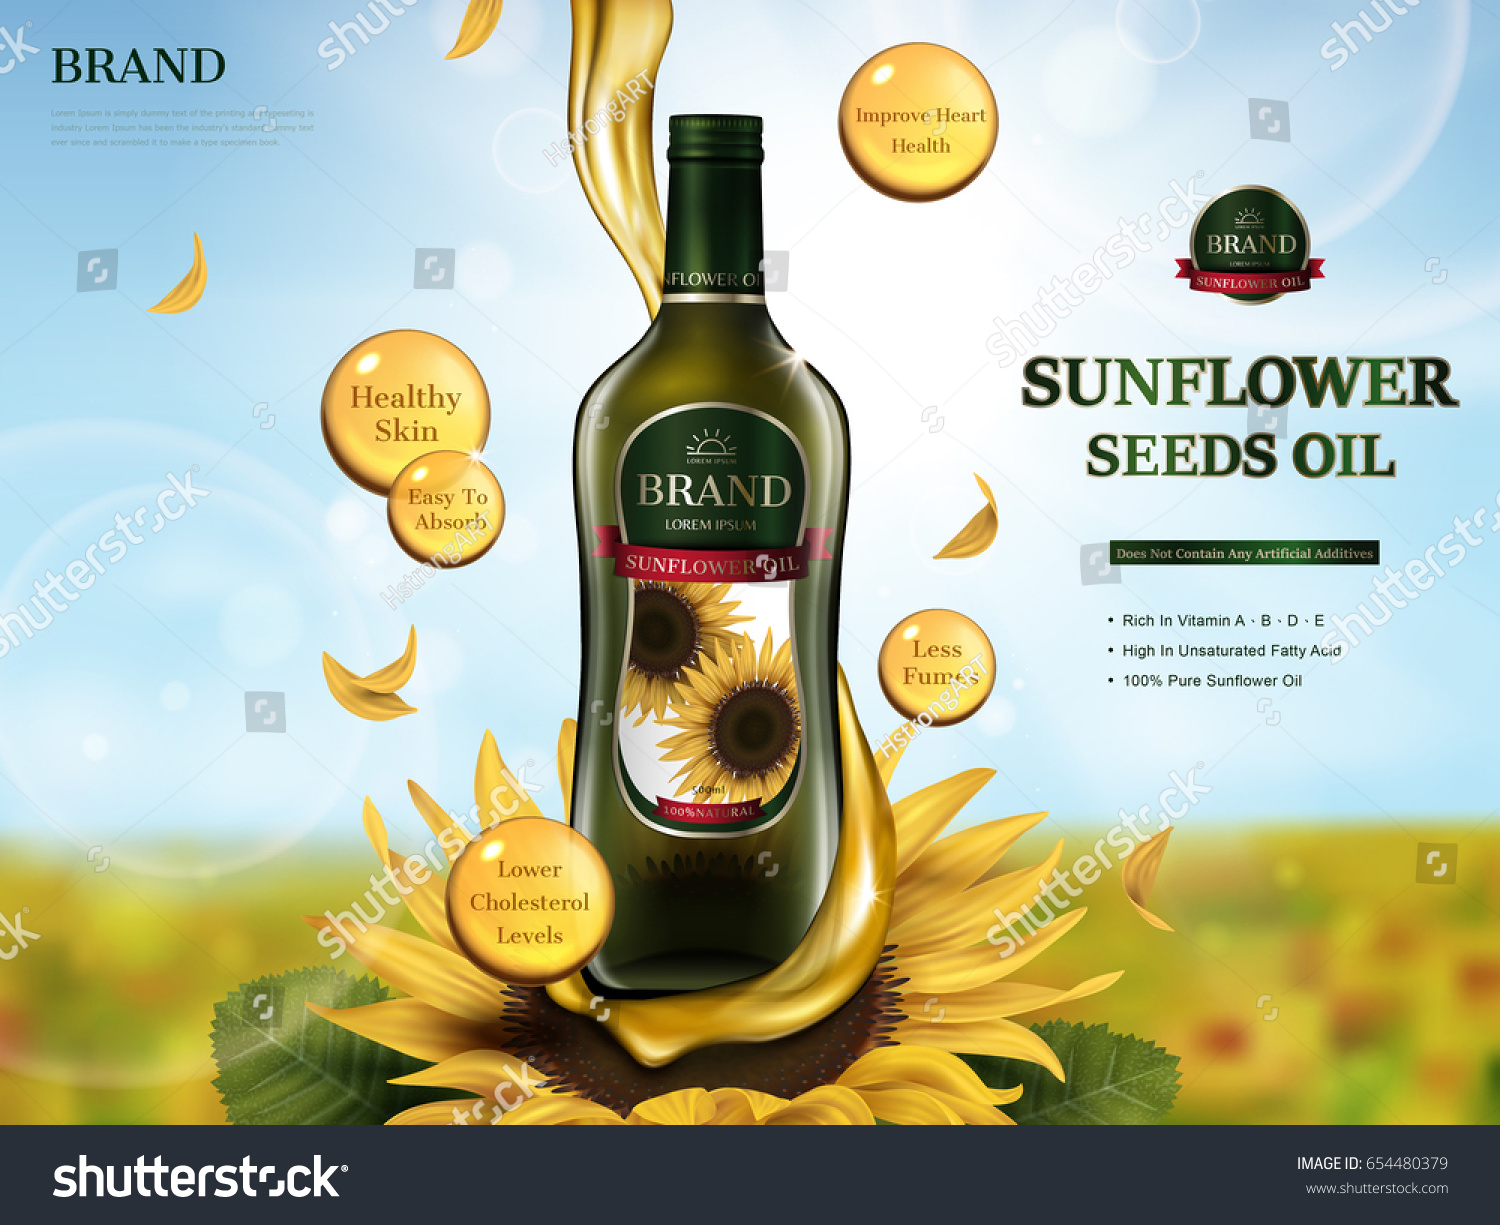 SVG of sunflower oil contained in glass bottle with oil flow element, sunflower farm 3d illustration svg